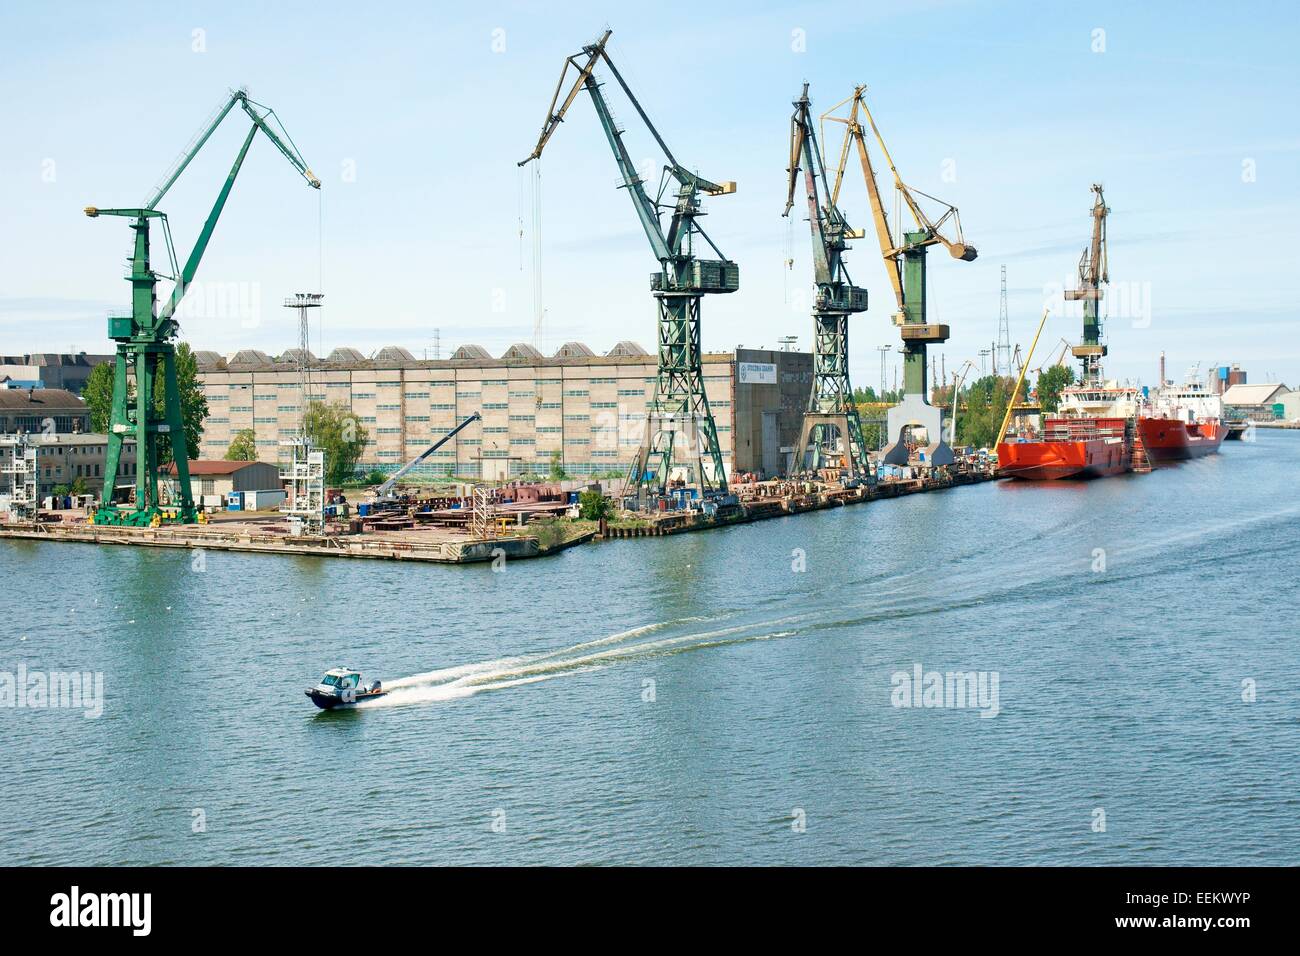 Gdansk Poland. Port dock facilities and warehouses of Stocznia Gdansk S.A. on south tip of Ostrow Island Stock Photo